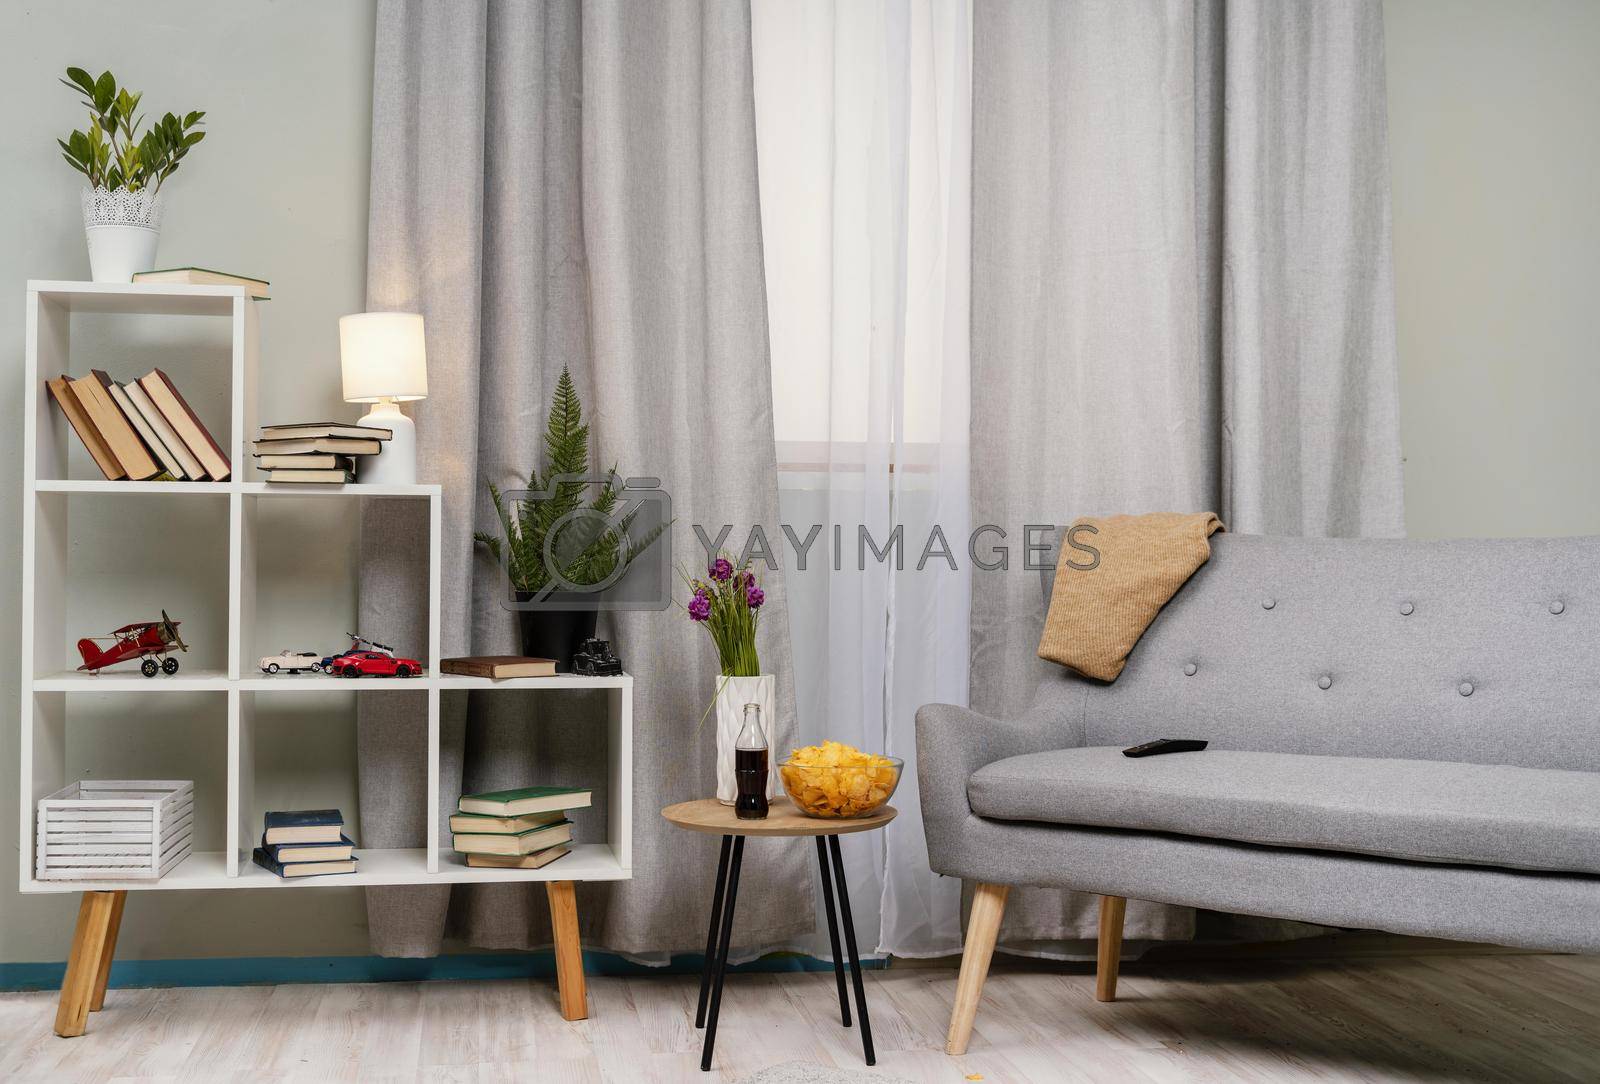 Royalty free image of room interior design4. High quality beautiful photo concept by Zahard